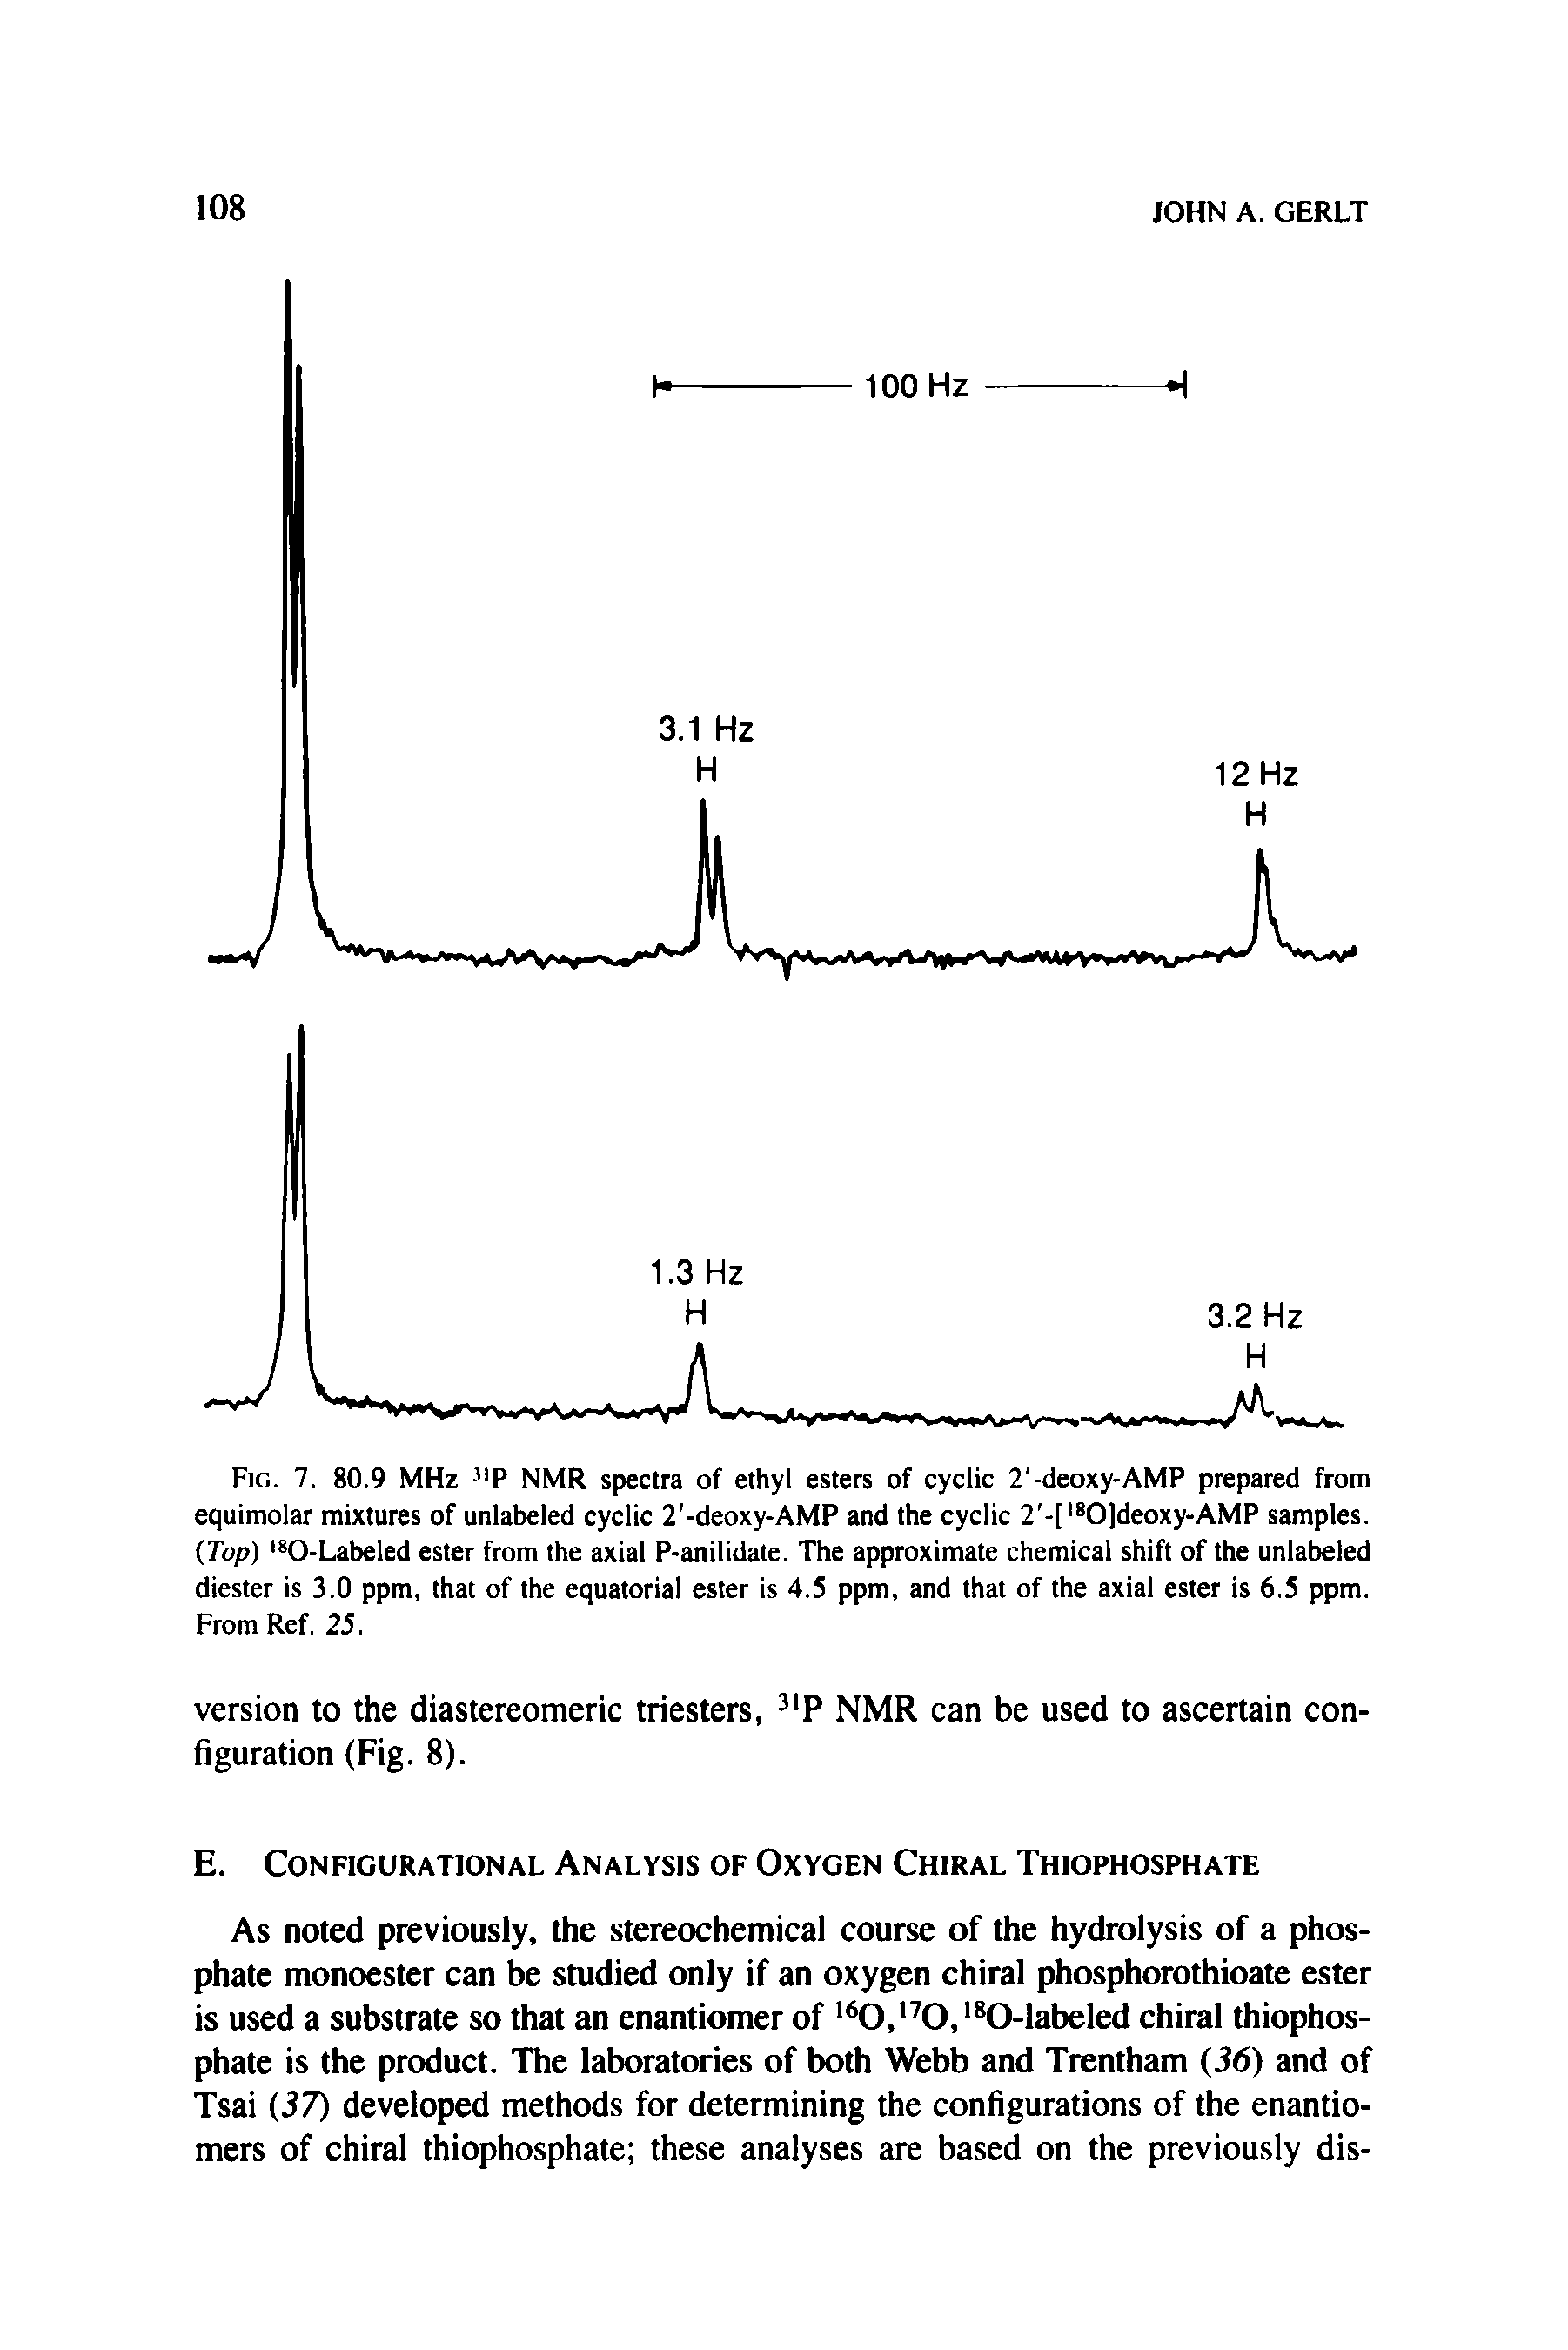 Fig. 7. 80.9 MHz "P NMR spectra of ethyl esters of cyclic 2 -deoxy-AMP prepared from equimolar mixtures of unlabeled cyclic 2 -deoxy-AMP and the cyclic 2 -[ 0]deoxy-AMP samples. (Top) 0-Labeled ester from the axial P-anilidate. The approximate chemicai shift of the unlabeled diester is 3.0 ppm, that of the equatorial ester is 4.5 ppm, and that of the axial ester is 6.5 ppm. From Ref. 25.